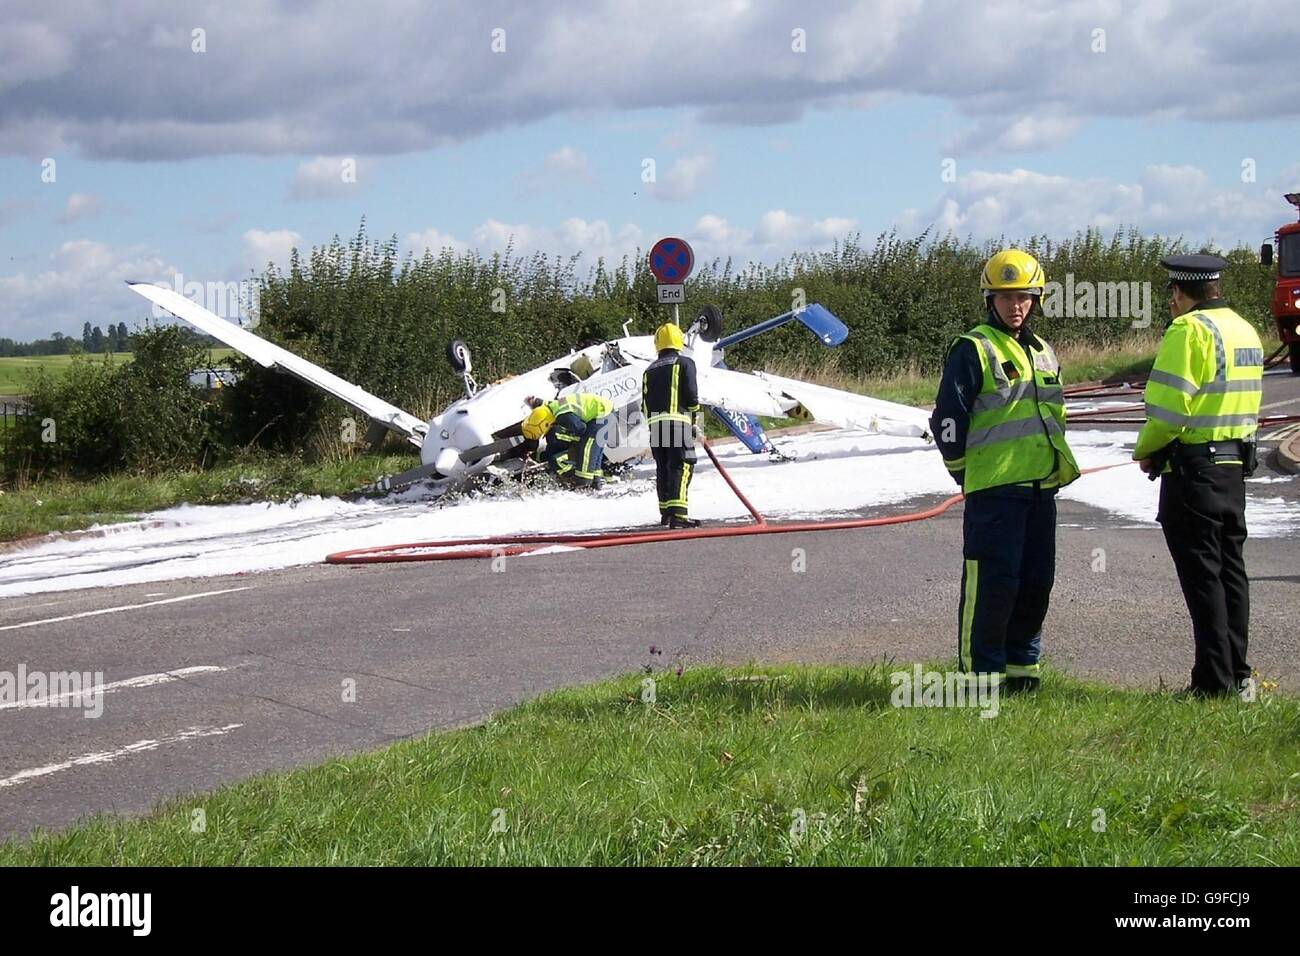 Emergency services personnel at the scene of a light aircraft crash on a side road leading to the A44 near Oxford. Stock Photo